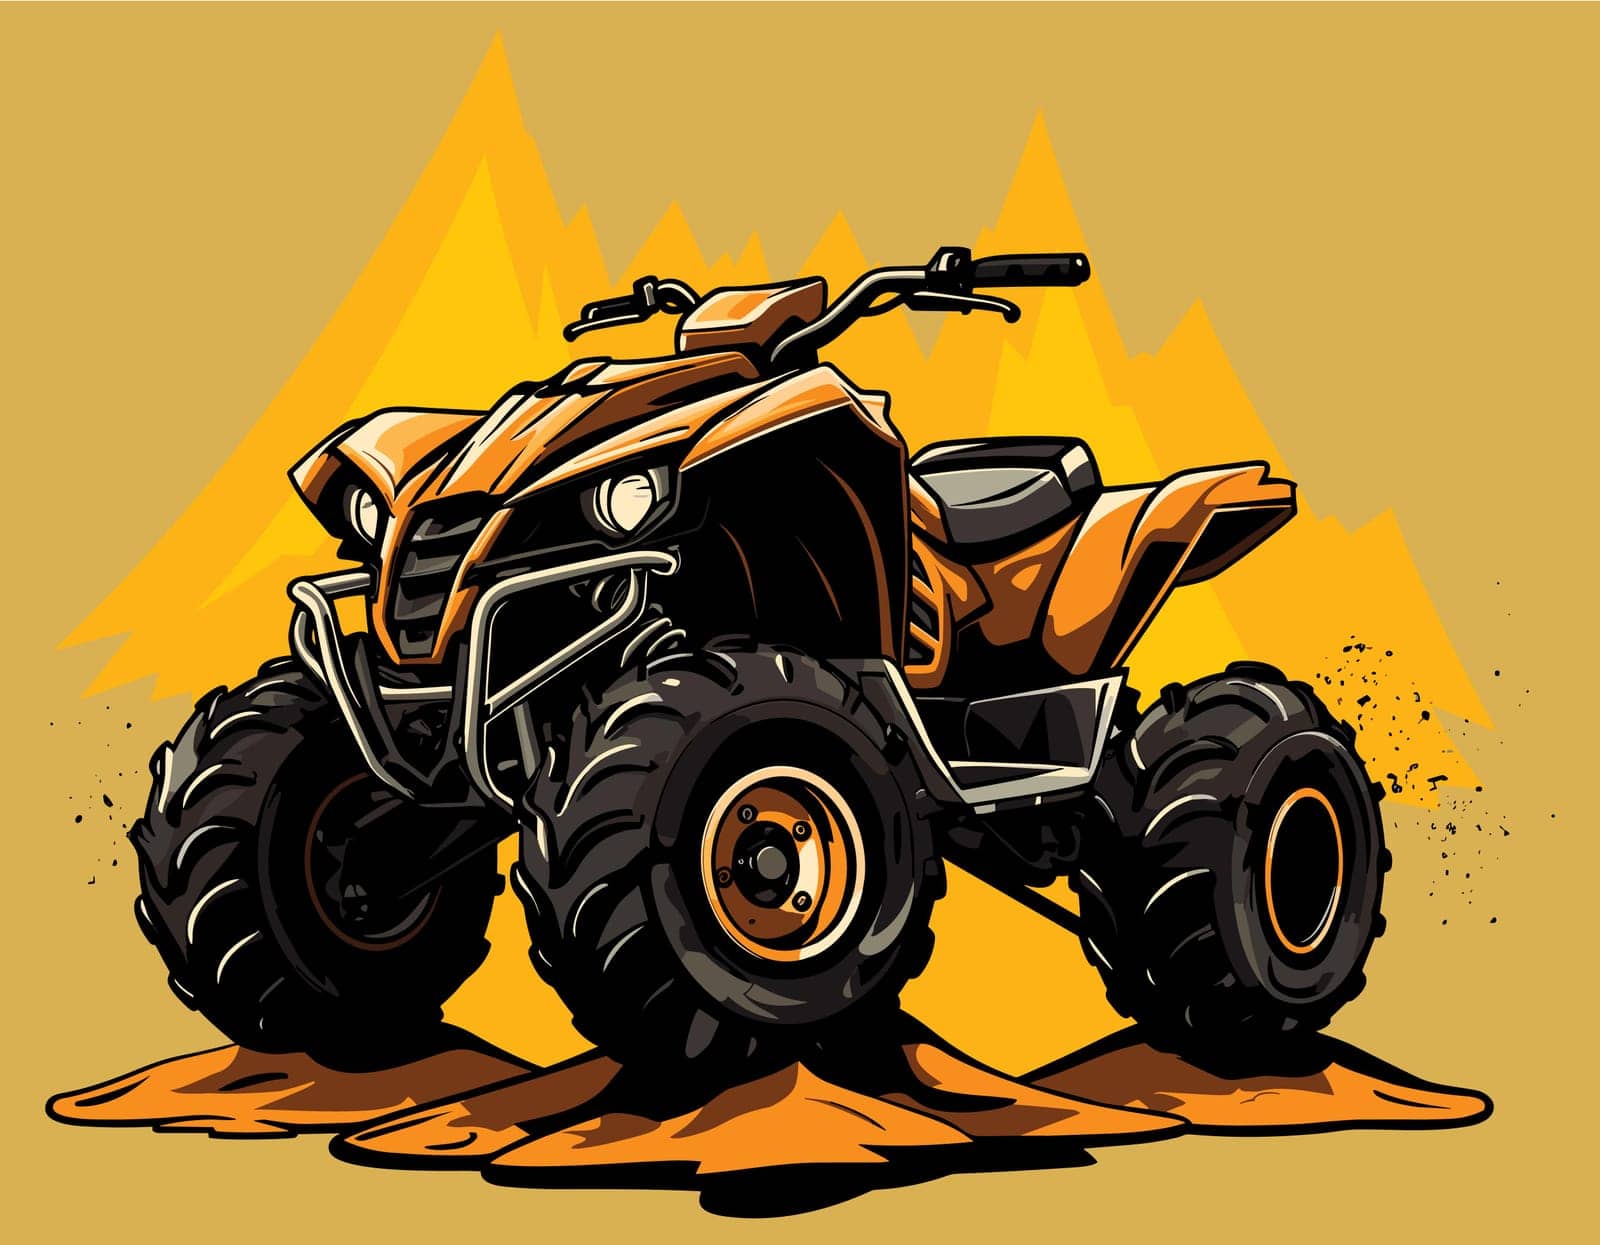 Vibrant illustration of orange all-terrain vehicle on sand, posed against yellow background with abstract sand dunes, ready for rugged adventures.